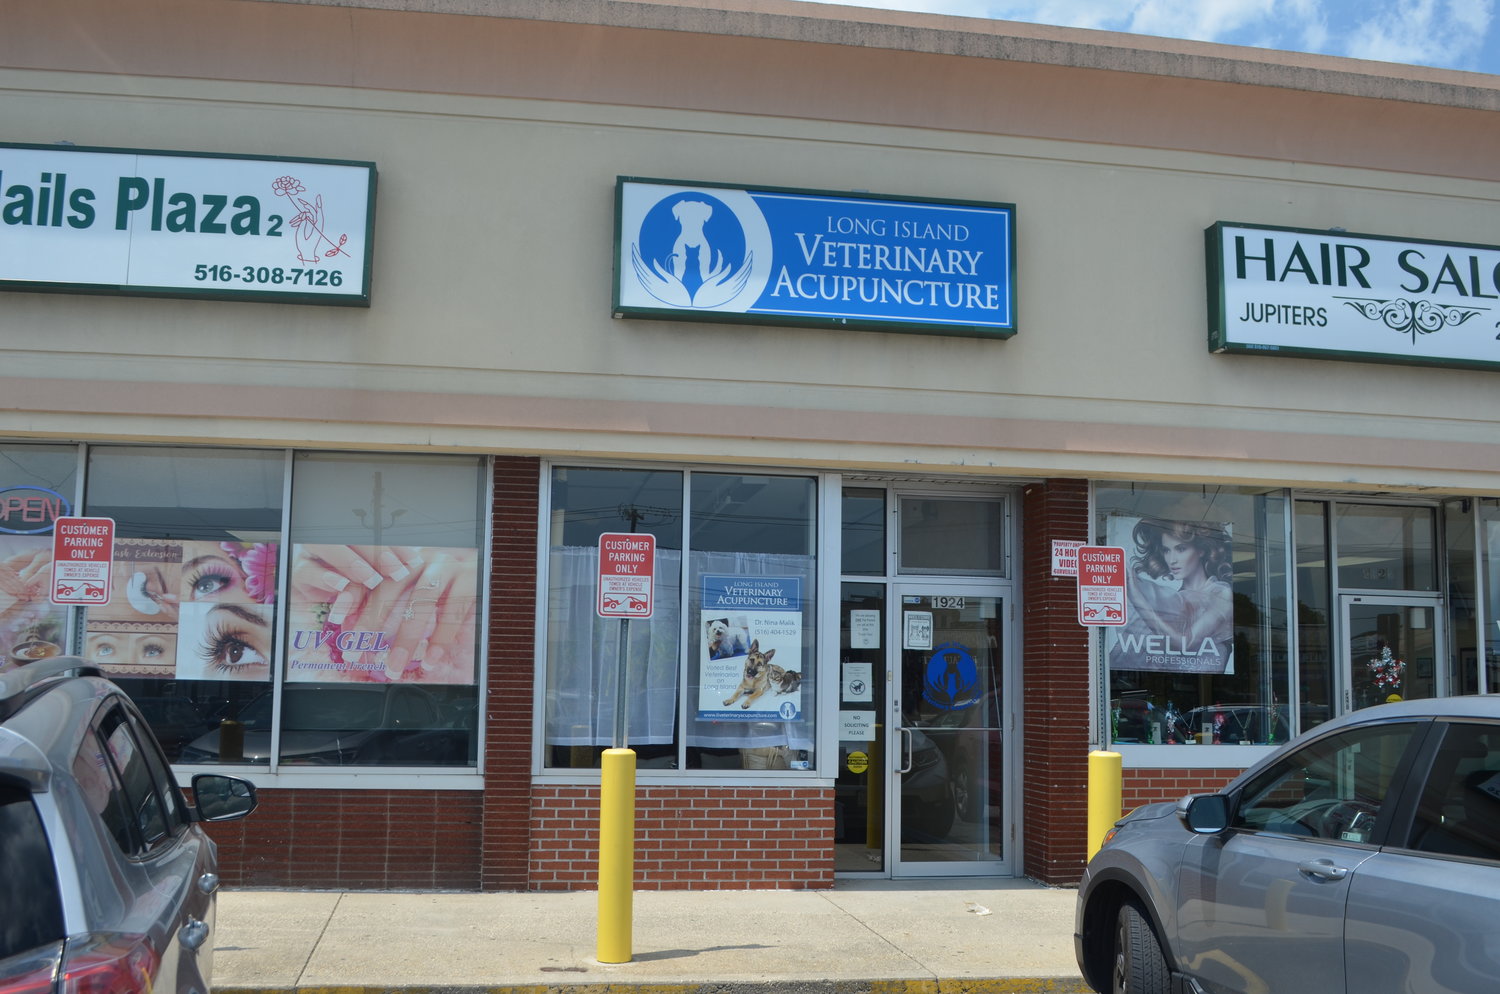 Long Island's only veterinary acupuncture practice is located on Wantagh Avenue. It is a cutting edge practice that uses Eastern medicine techniques to treat a variety of illnesses in pets.